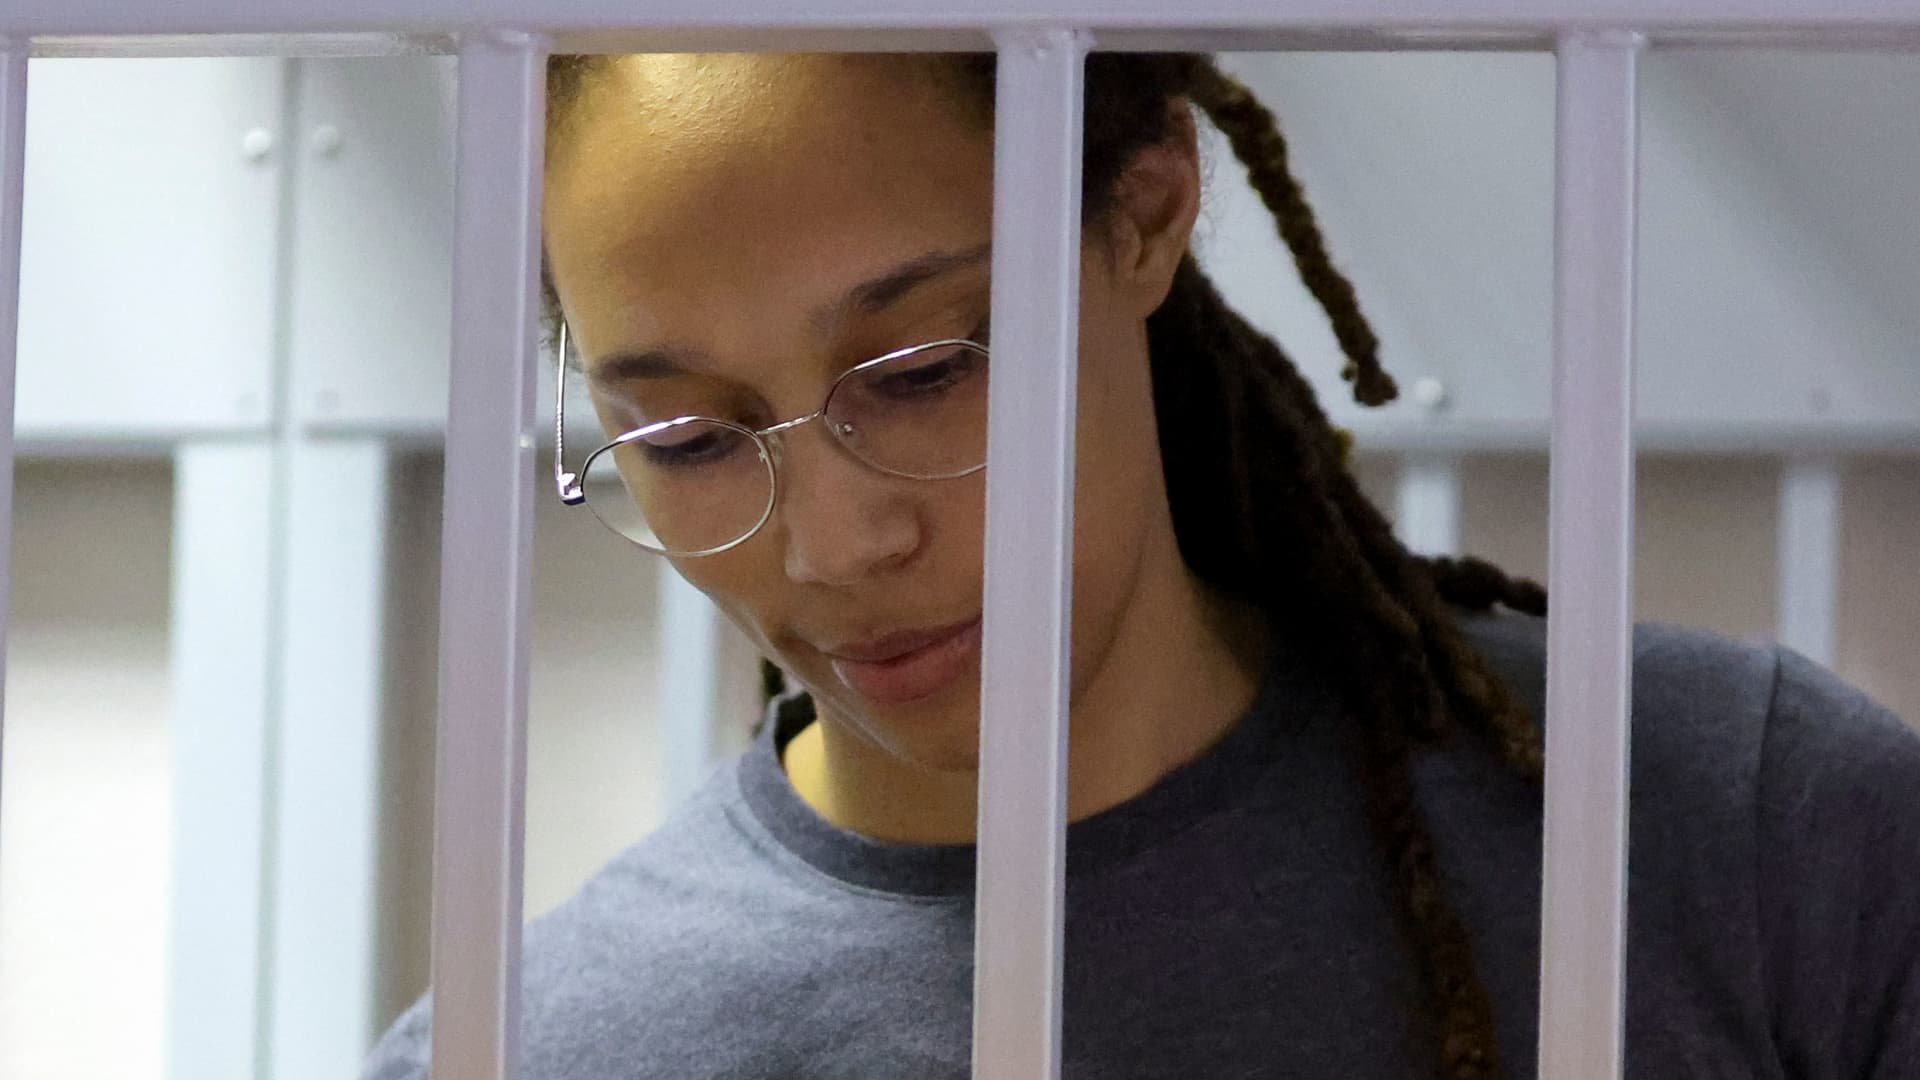 Russian court will hear WNBA star Brittney Griner’s appeal on Tuesday